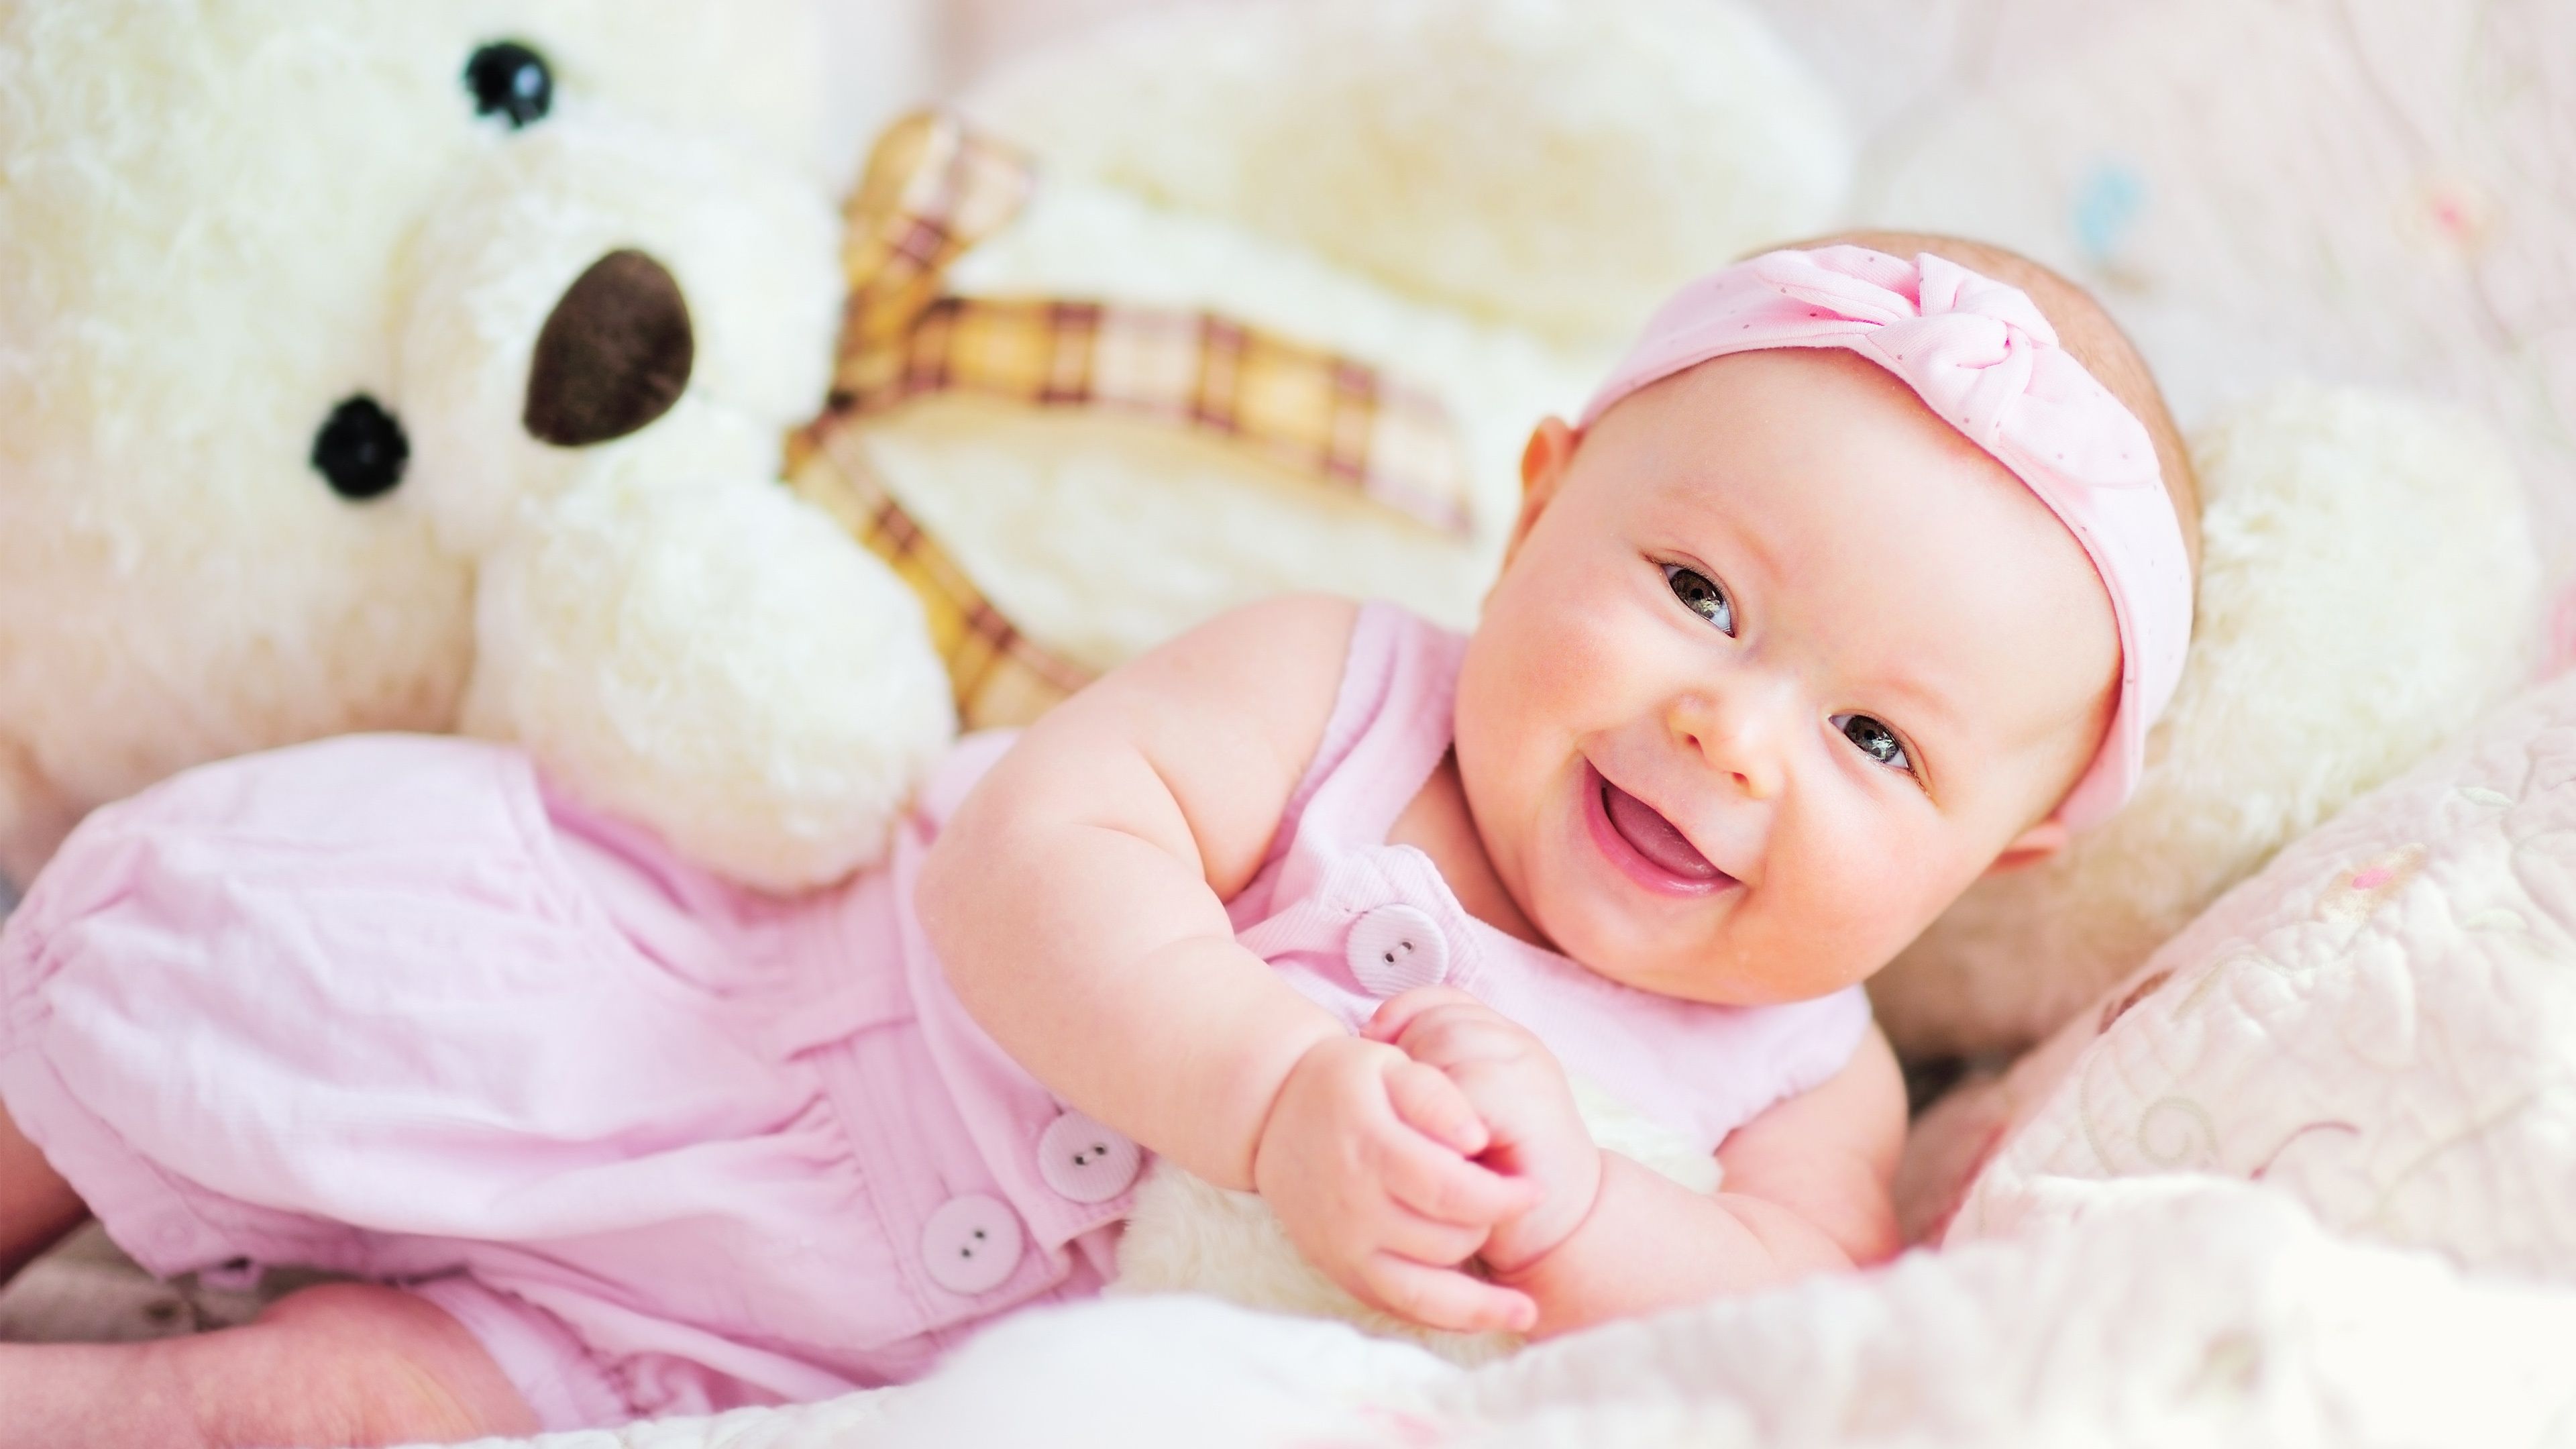 Cute Baby Wallpapers Cute Babies Pictures Cute Baby Girl